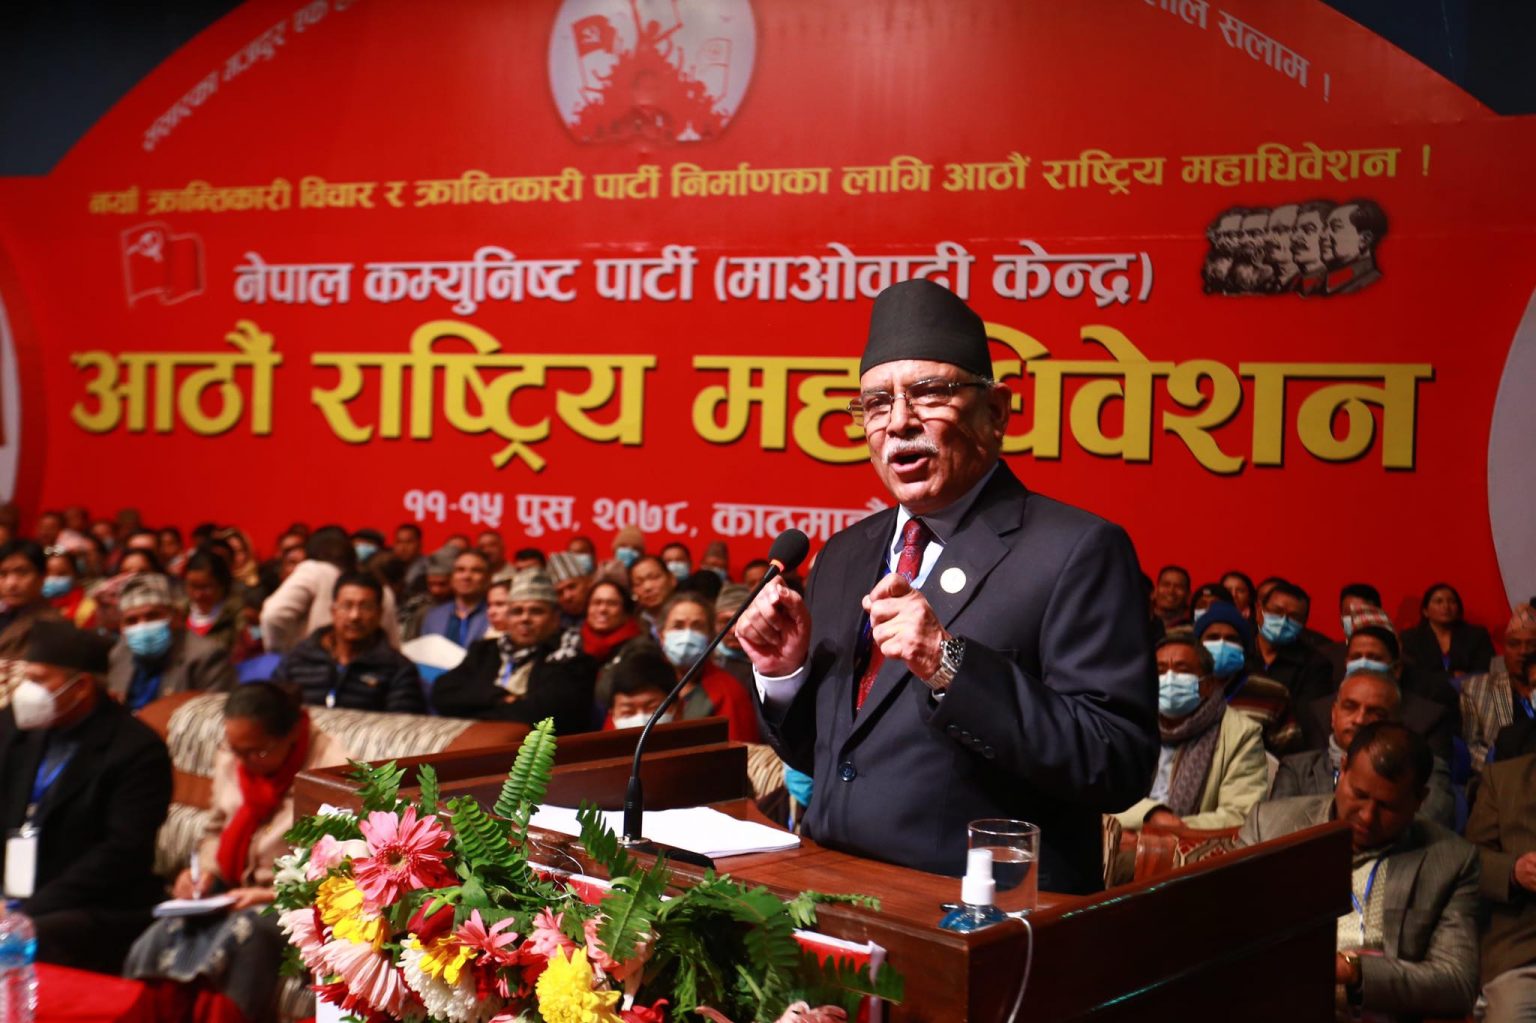 Prachanda refers to his political dossier to understand view on MCC